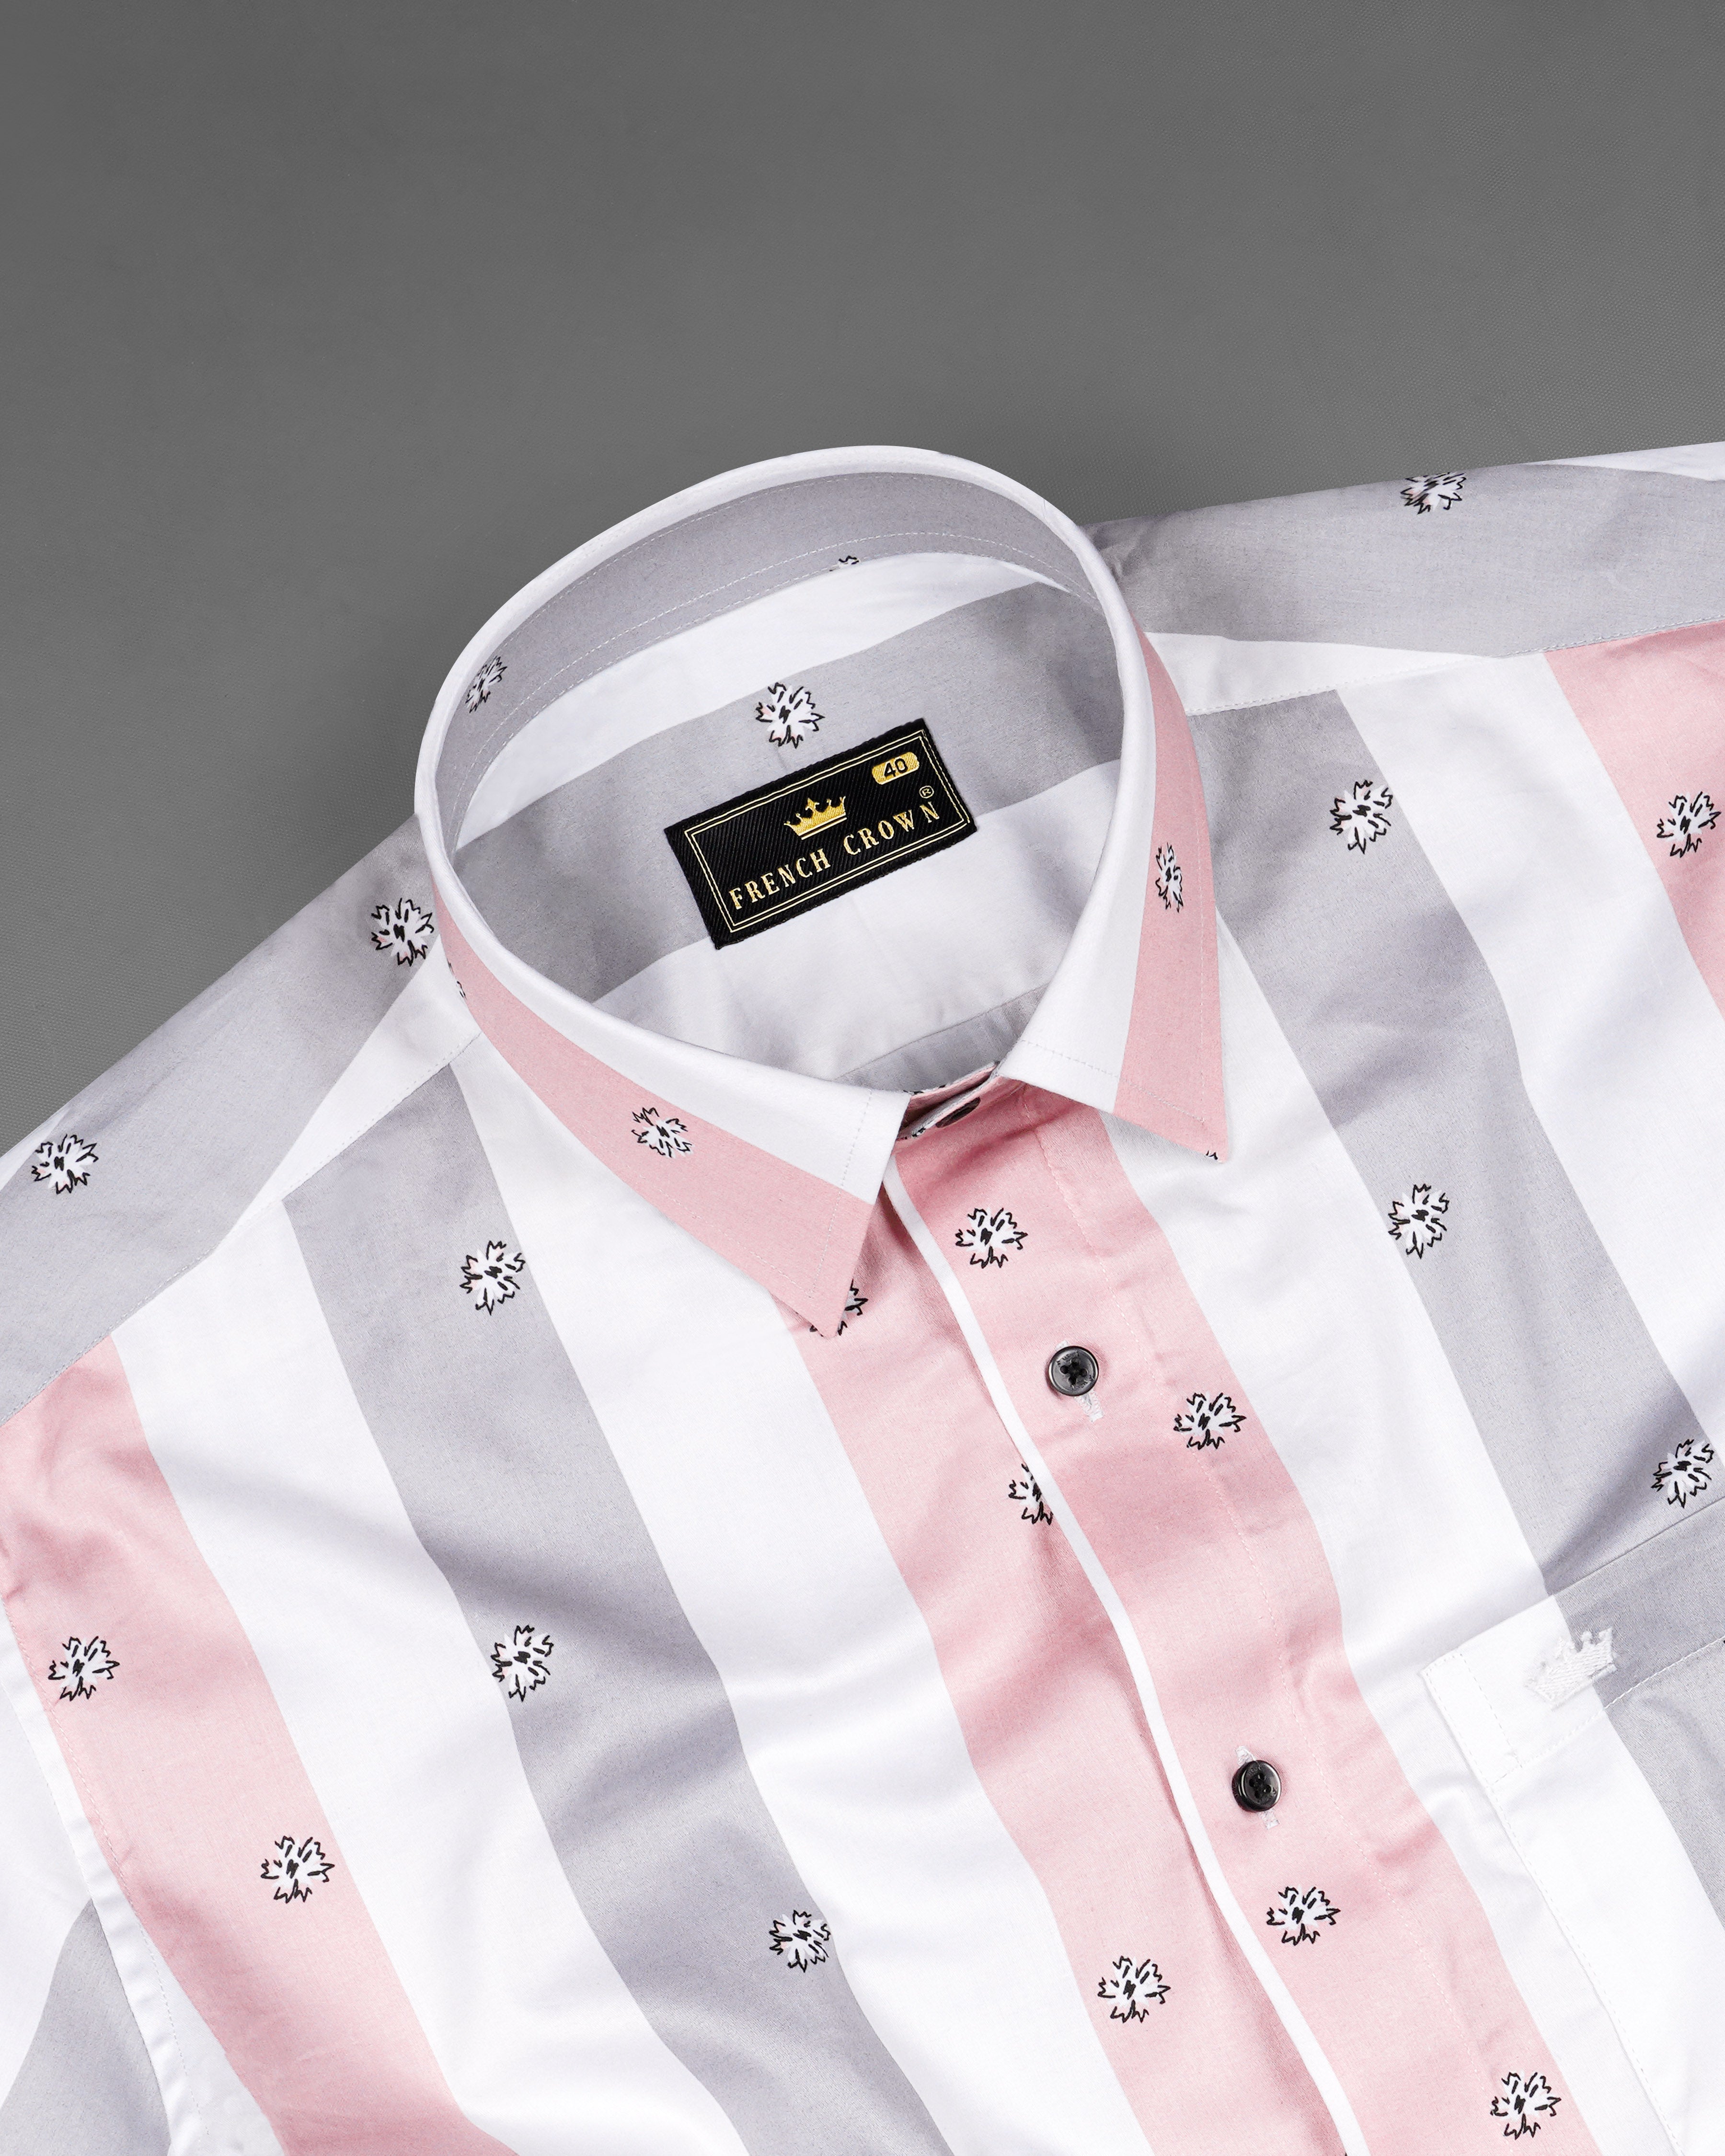 Bright White with Spun Pearl Gray and Cavern Pink Striped Super Soft Premium Cotton Shirt 8253-BLK-38, 8253-BLK-H-38, 8253-BLK-39, 8253-BLK-H-39, 8253-BLK-40, 8253-BLK-H-40, 8253-BLK-42, 8253-BLK-H-42, 8253-BLK-44, 8253-BLK-H-44, 8253-BLK-46, 8253-BLK-H-46, 8253-BLK-48, 8253-BLK-H-48, 8253-BLK-50, 8253-BLK-H-50, 8253-BLK-52, 8253-BLK-H-52